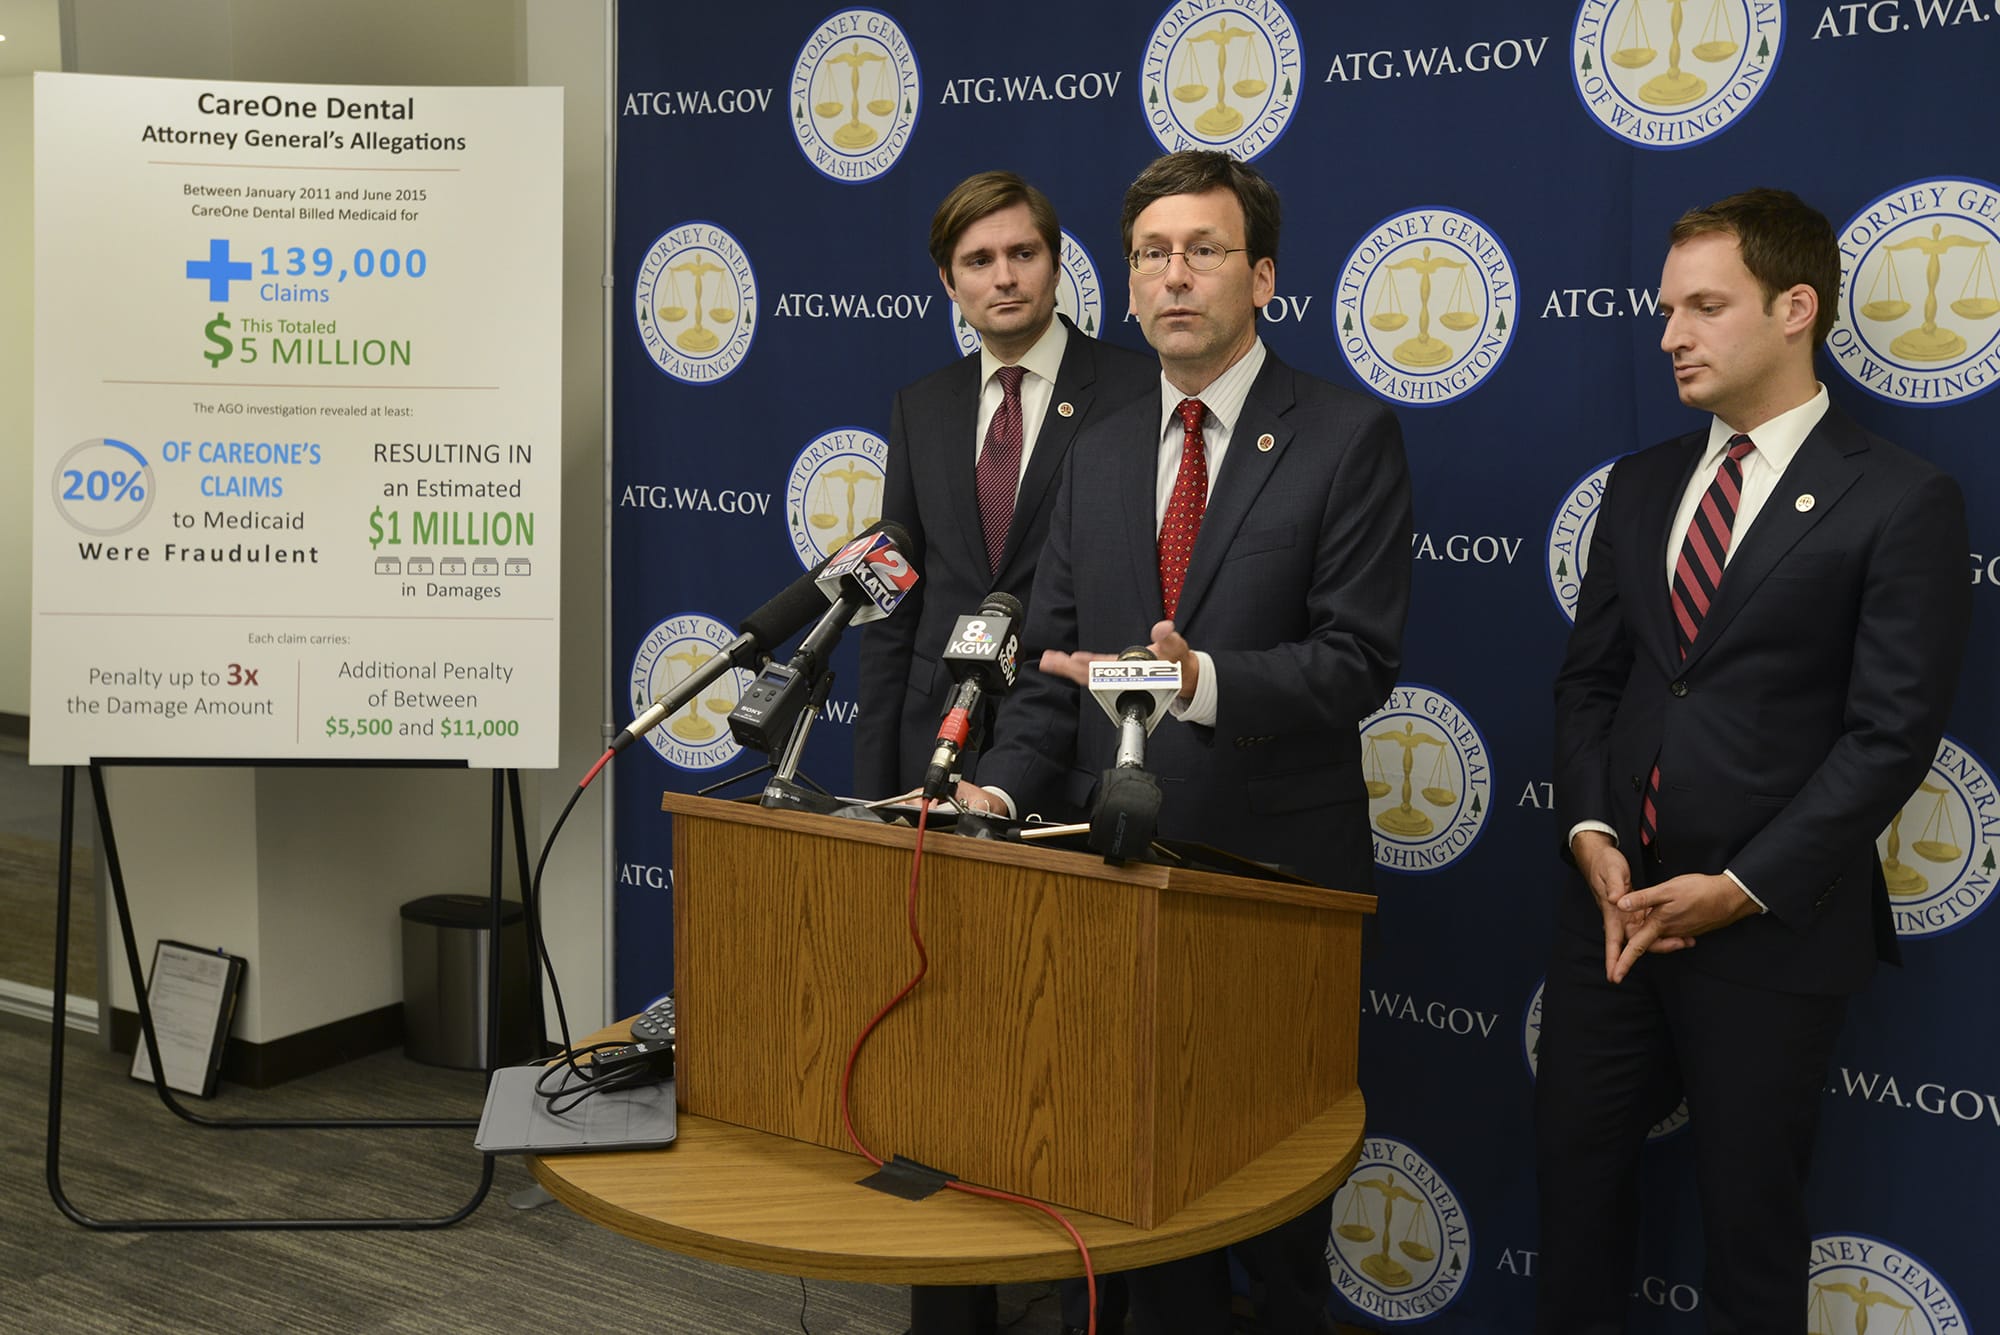 Attorney General Bob Ferguson announced a lawsuit against CareOne Dental for as much as $1 million in Medicaid fraud on Sept. 1, 2015, at the Attorney General's Office in Vancouver.